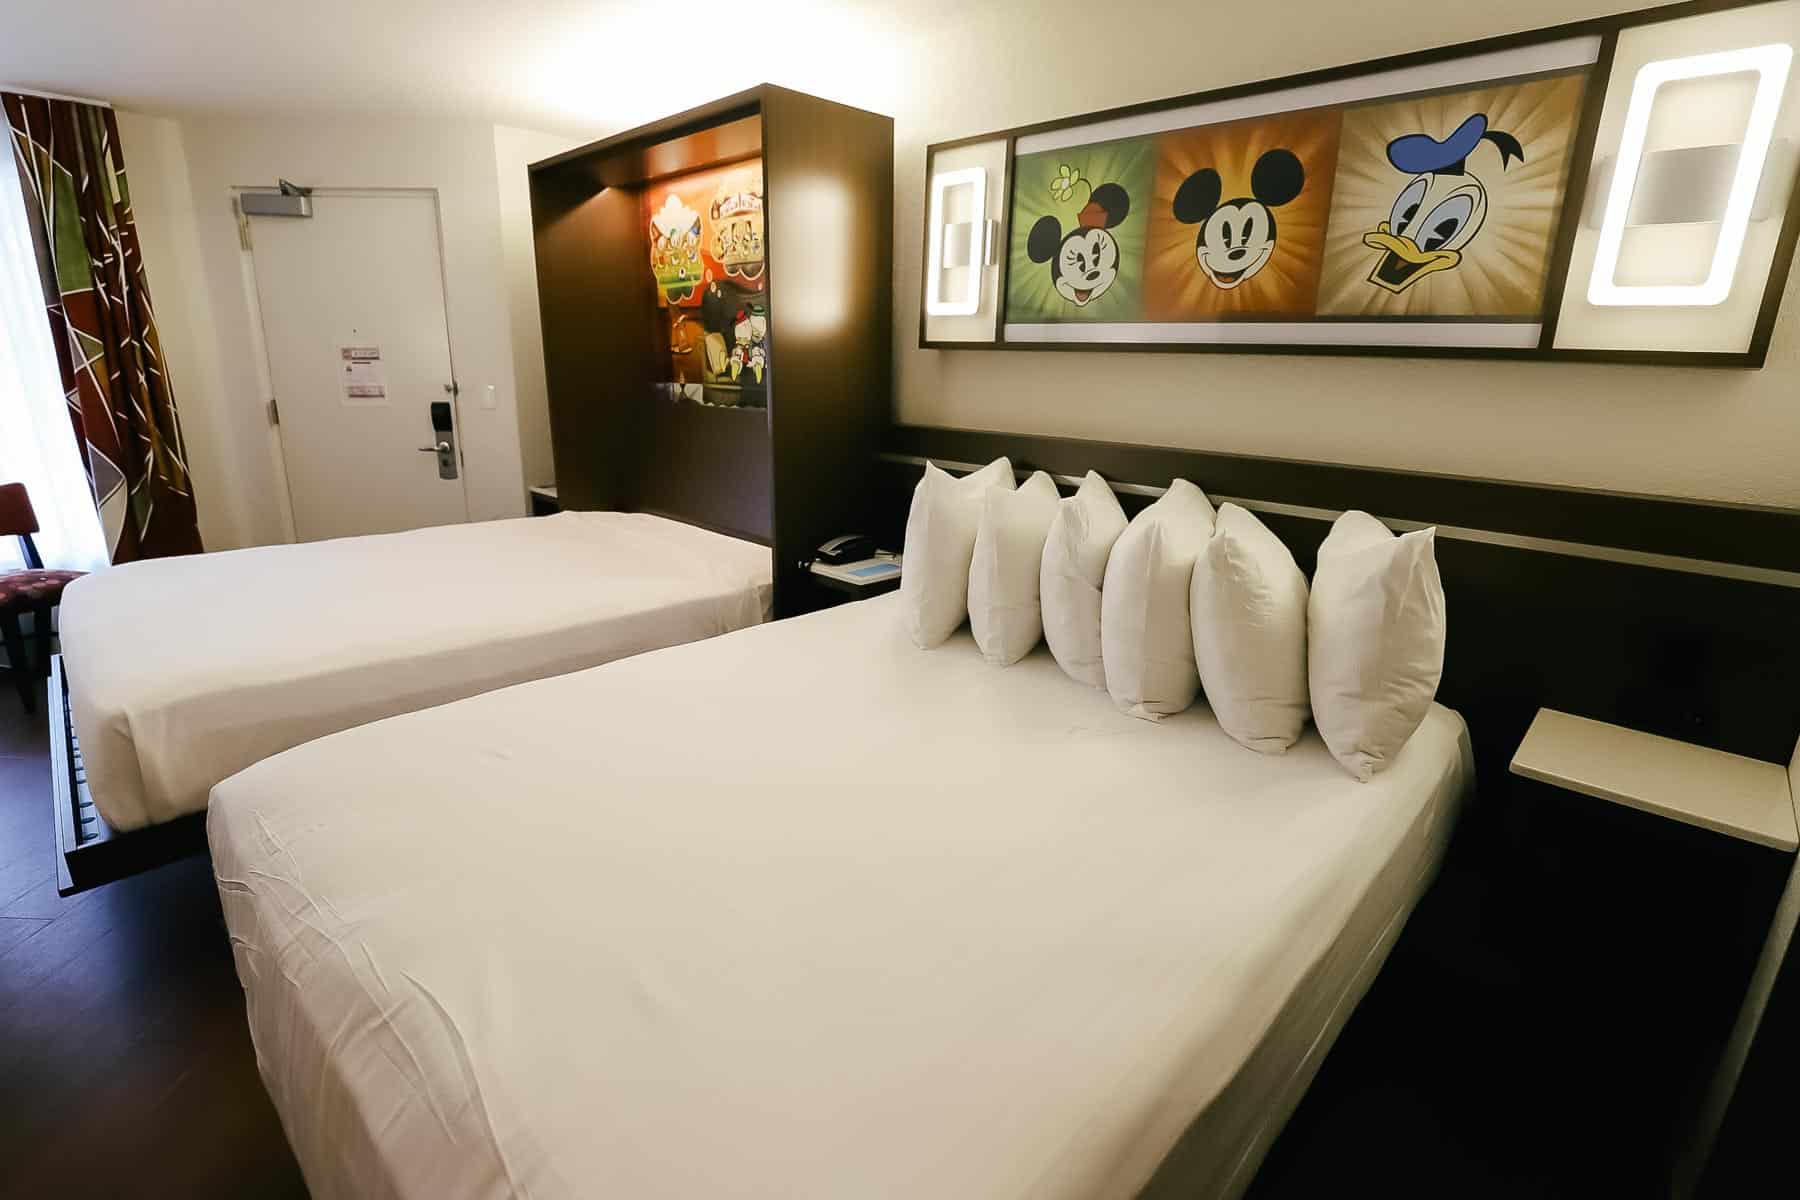 The Rooms at Disney’s All-Star Music (Everything You Need to Know with Photos and Video)